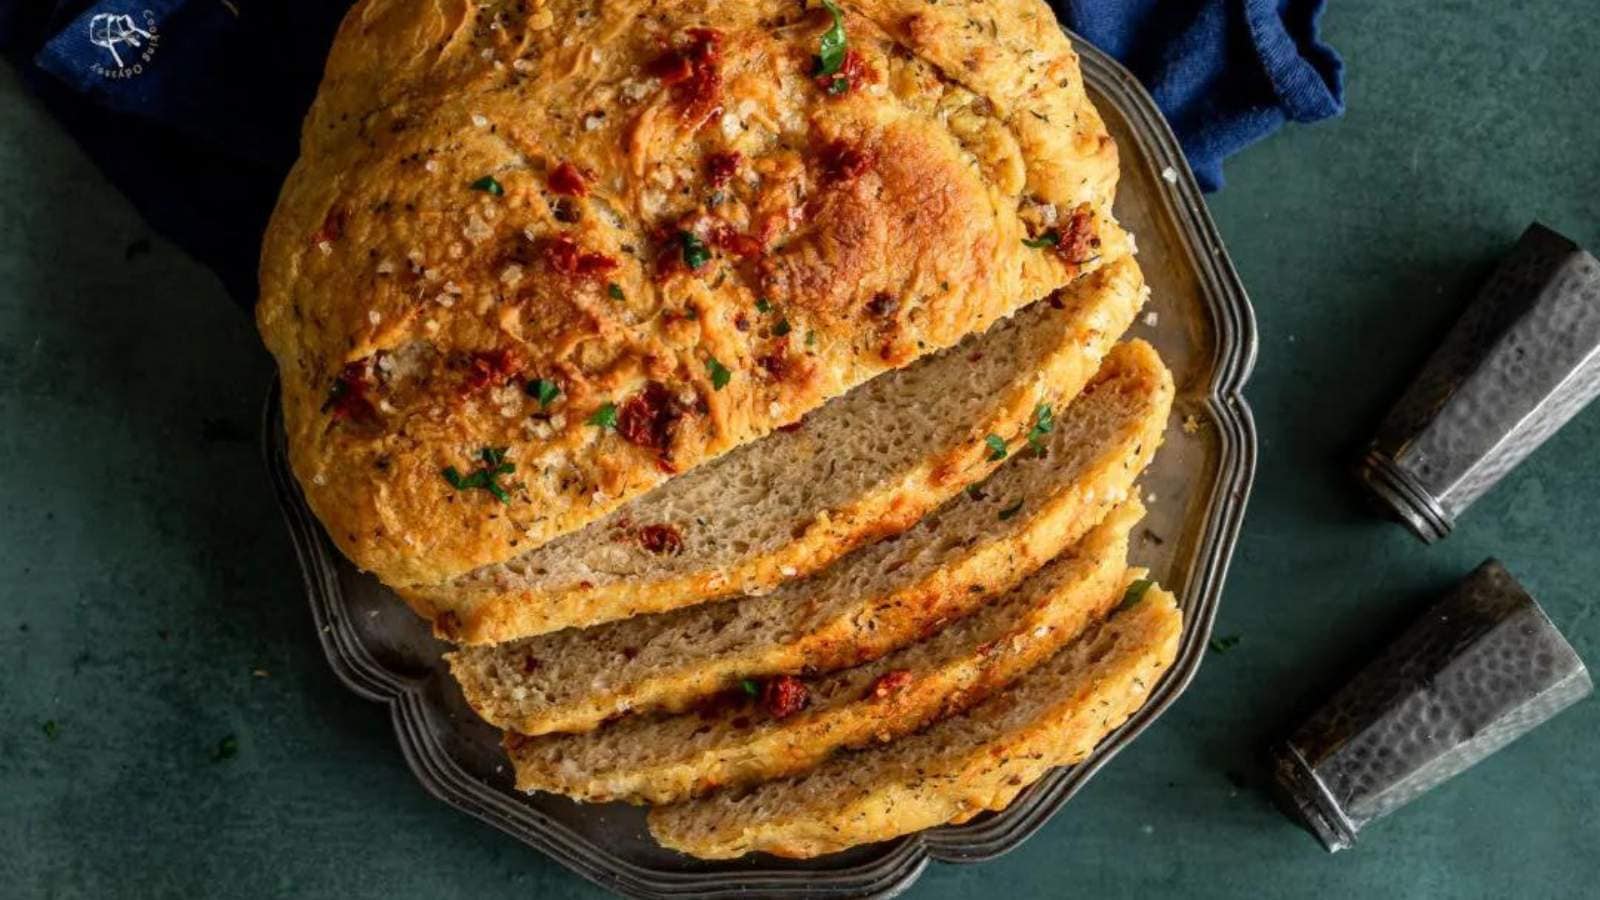 Sundried Tomato Bread recipe by J Cooking Odyssey.